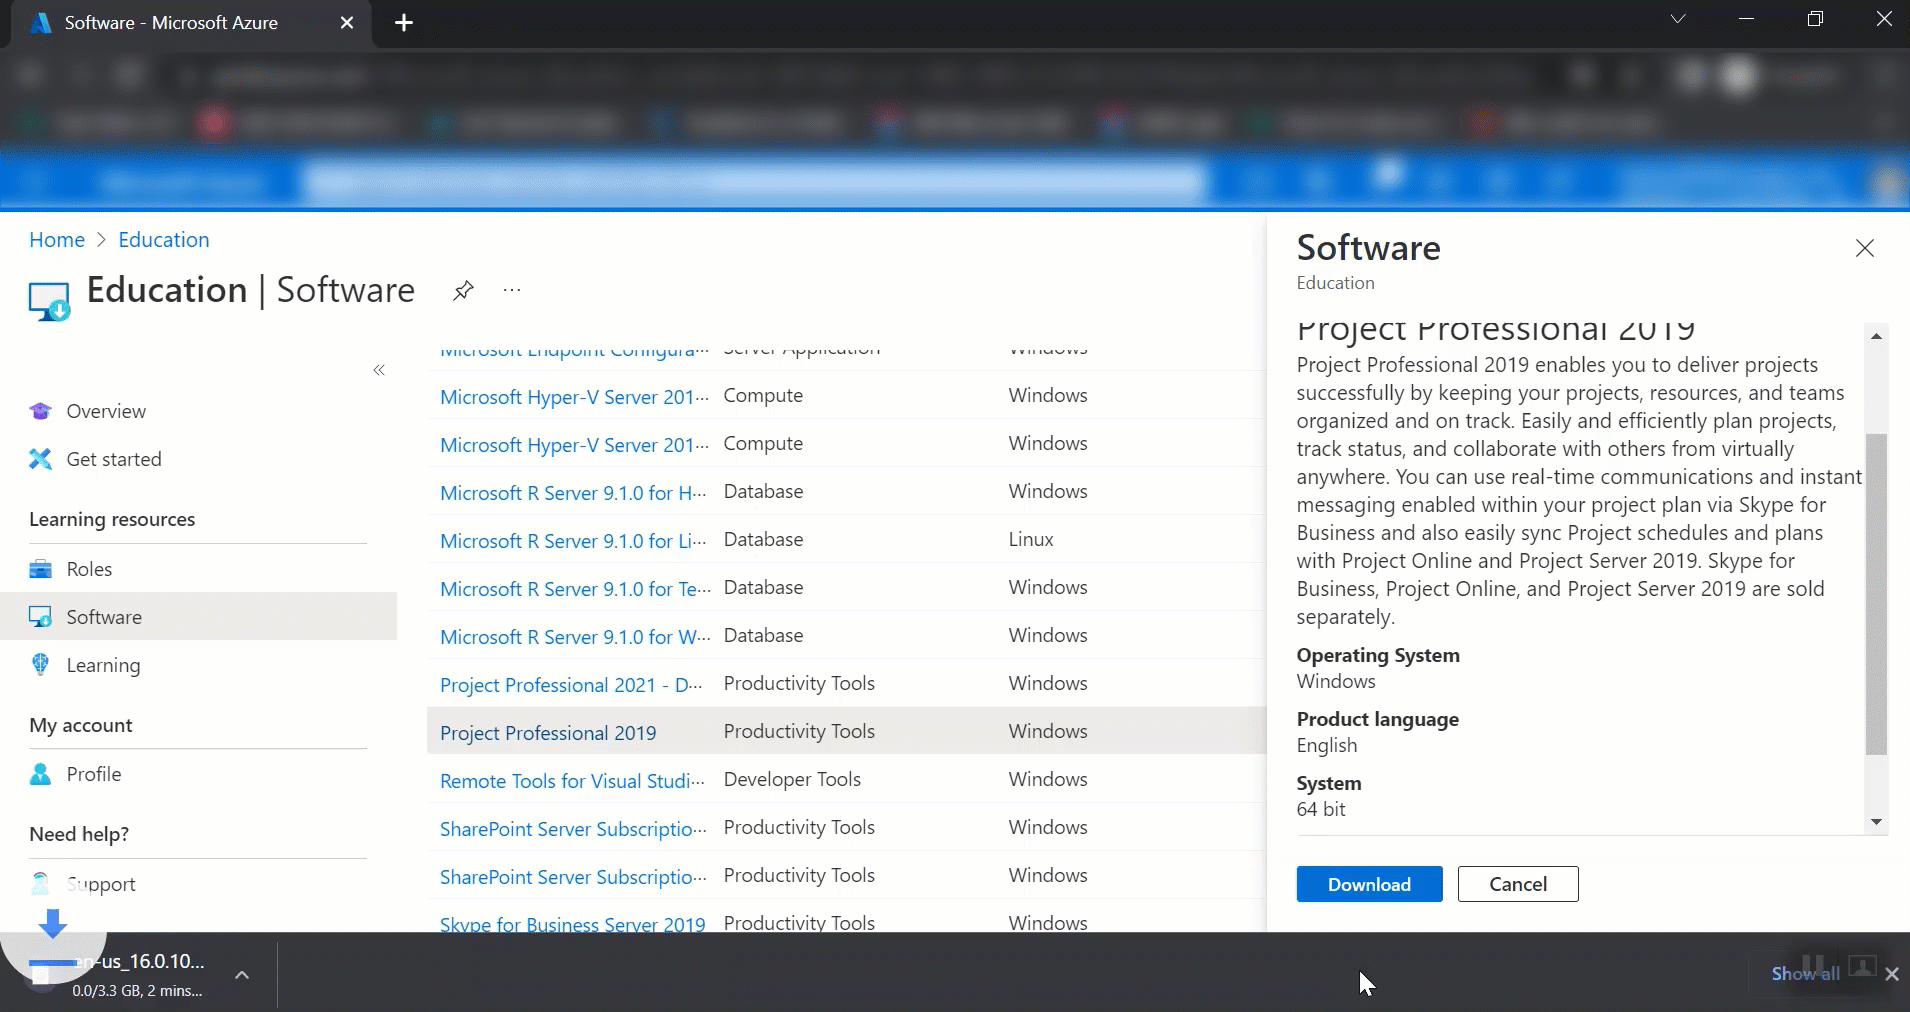 Project Professional download window with download button